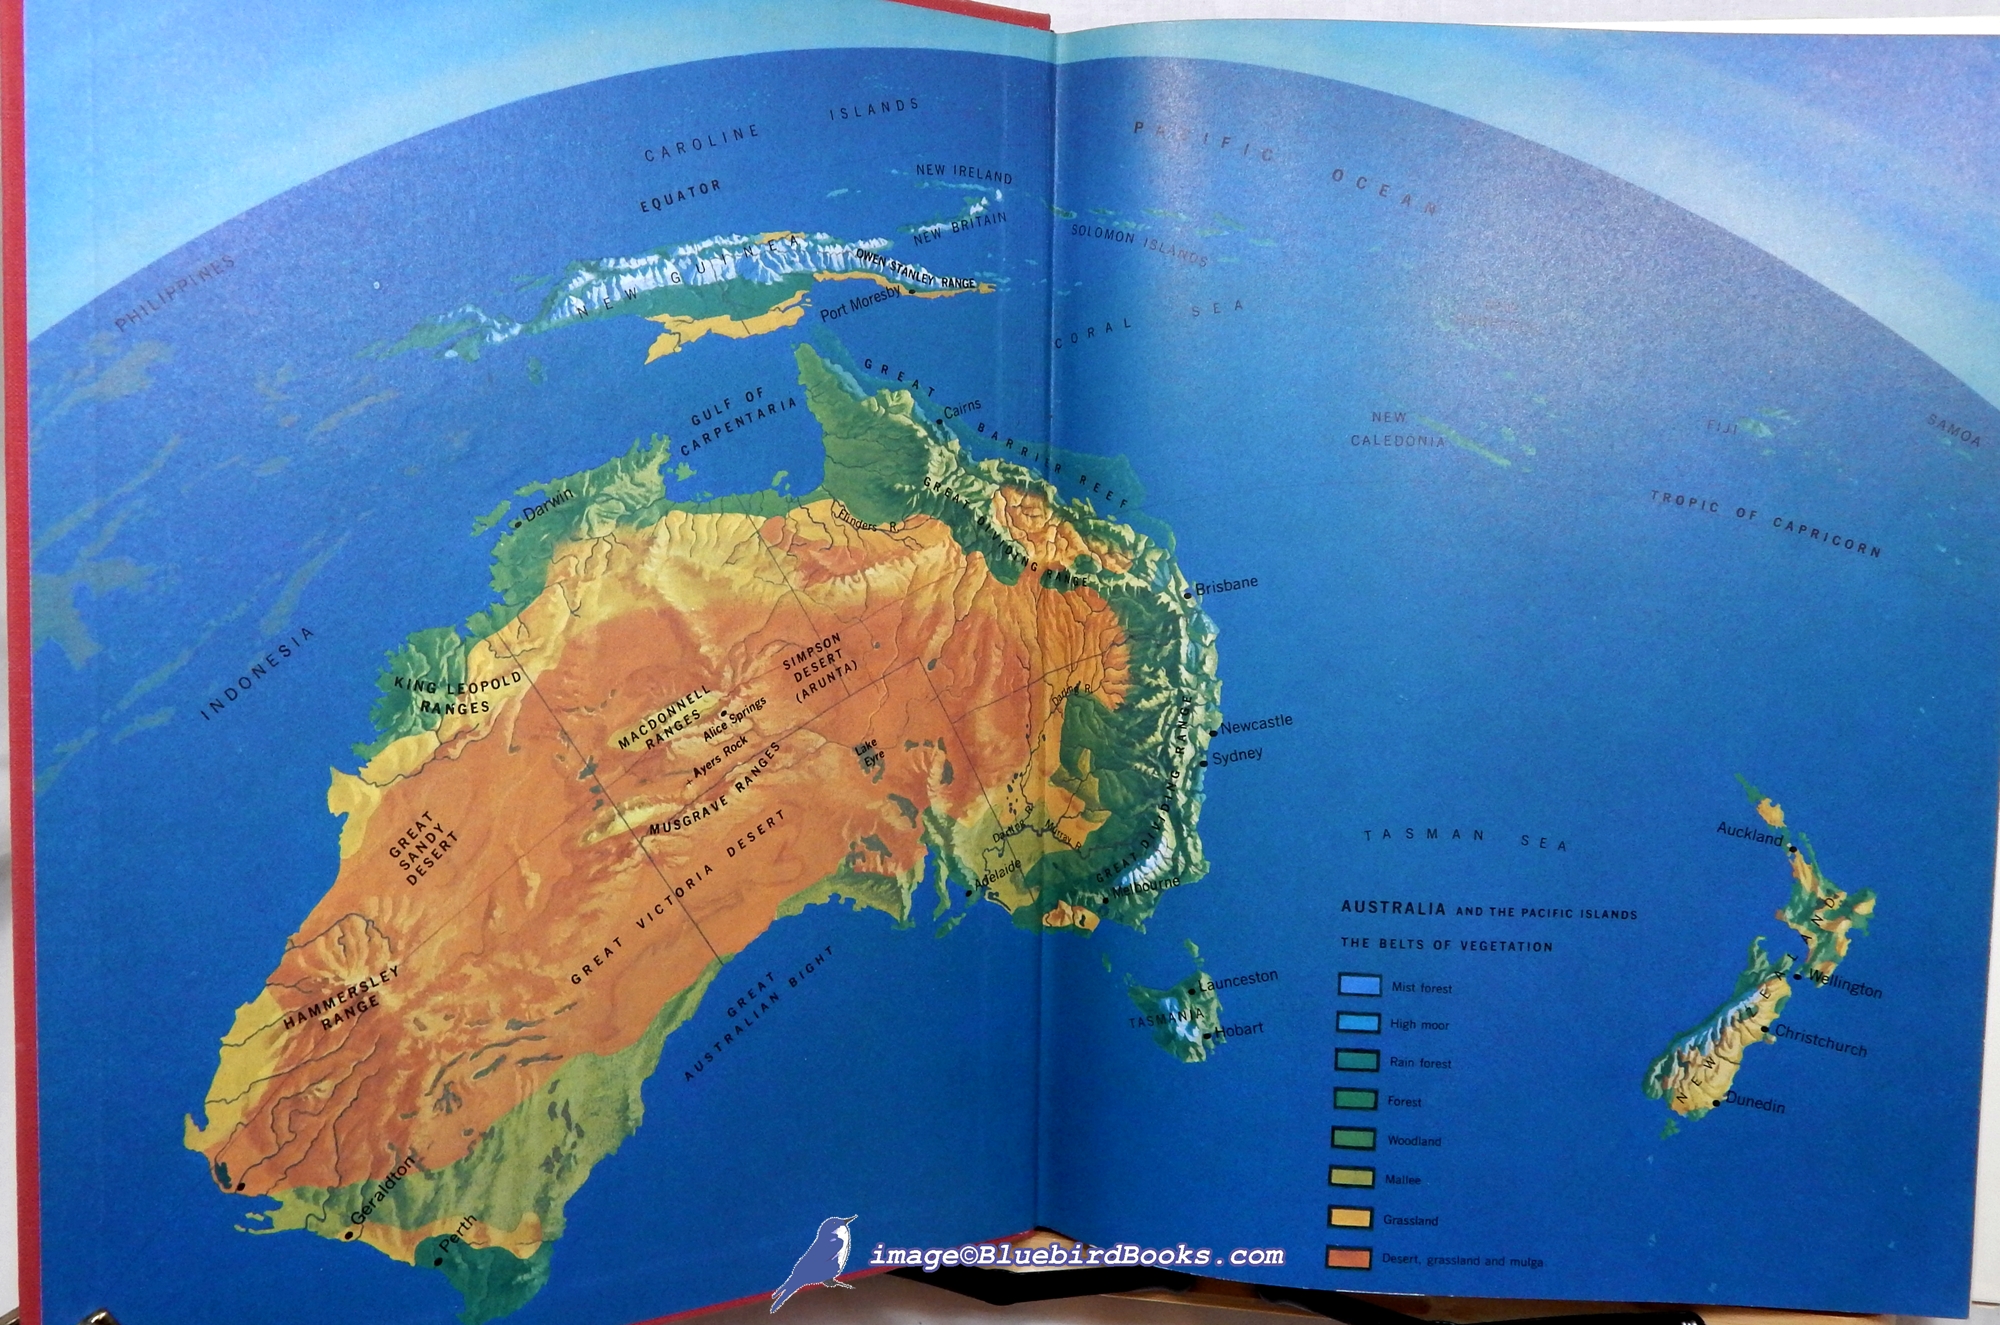 KEAST, ALLEN - Australia and the Pacific Islands: A Natural History (the Continents We Live on Series)